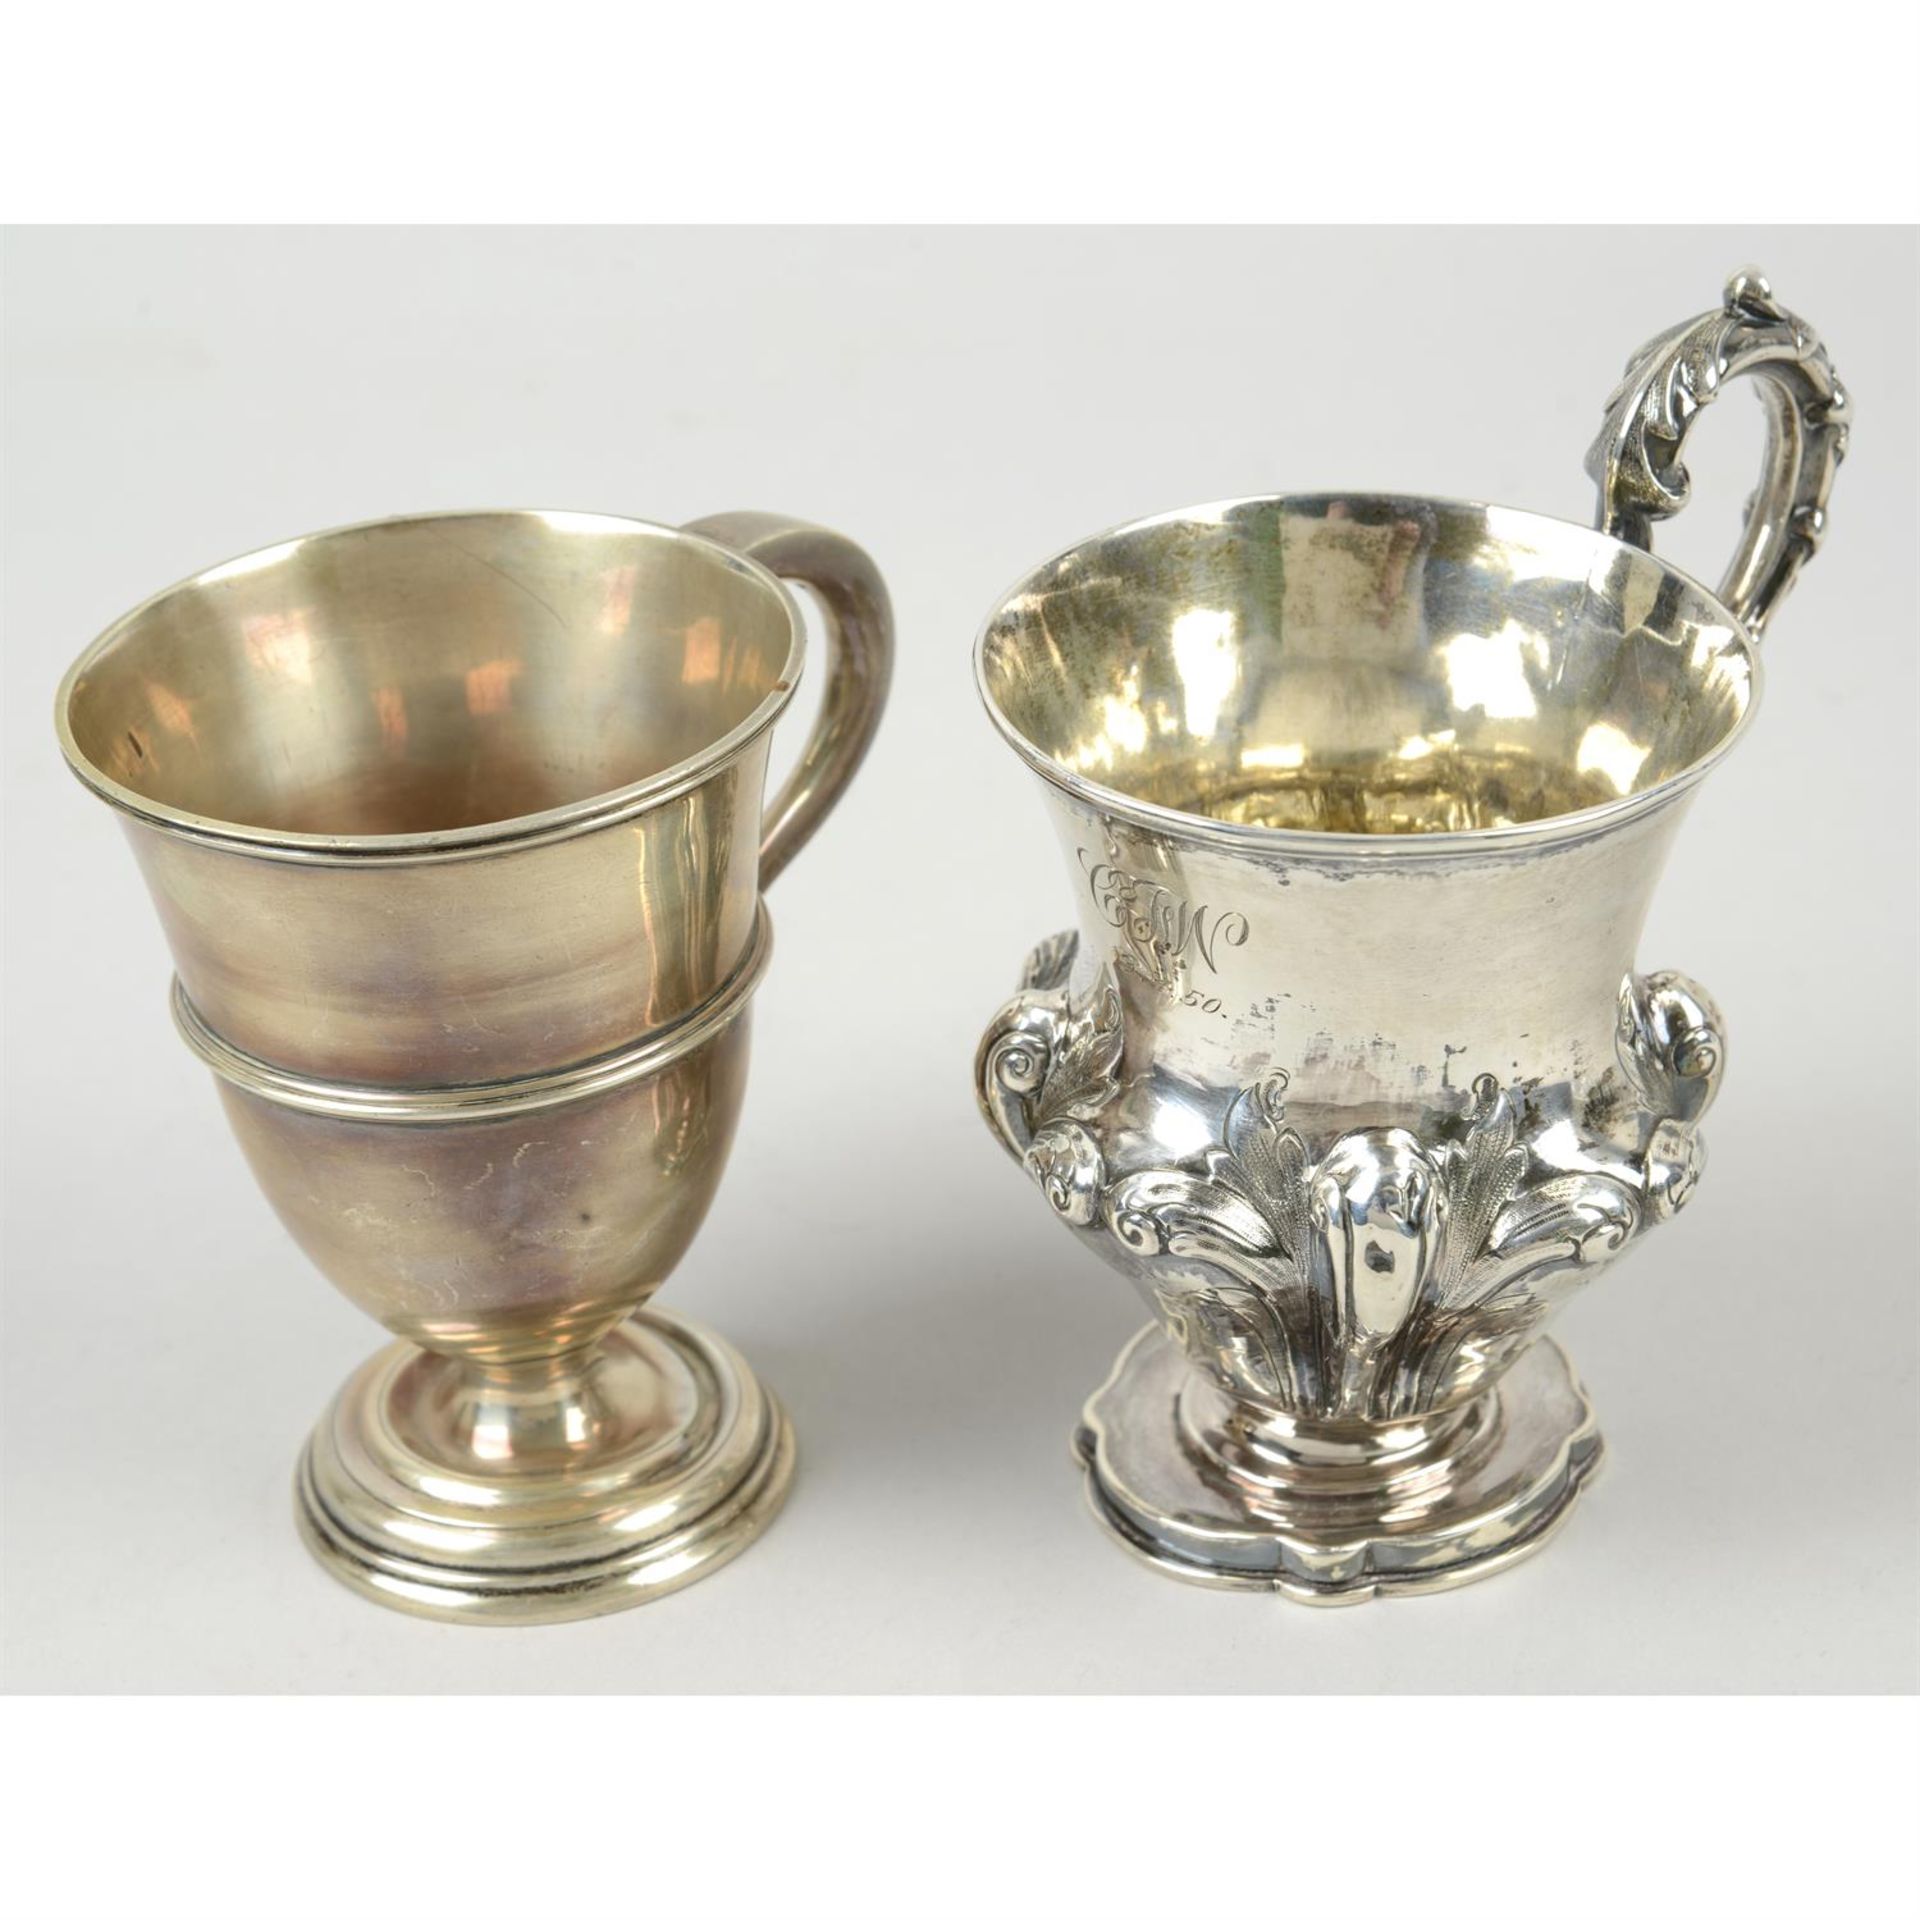 Two Victorian silver christening mugs.